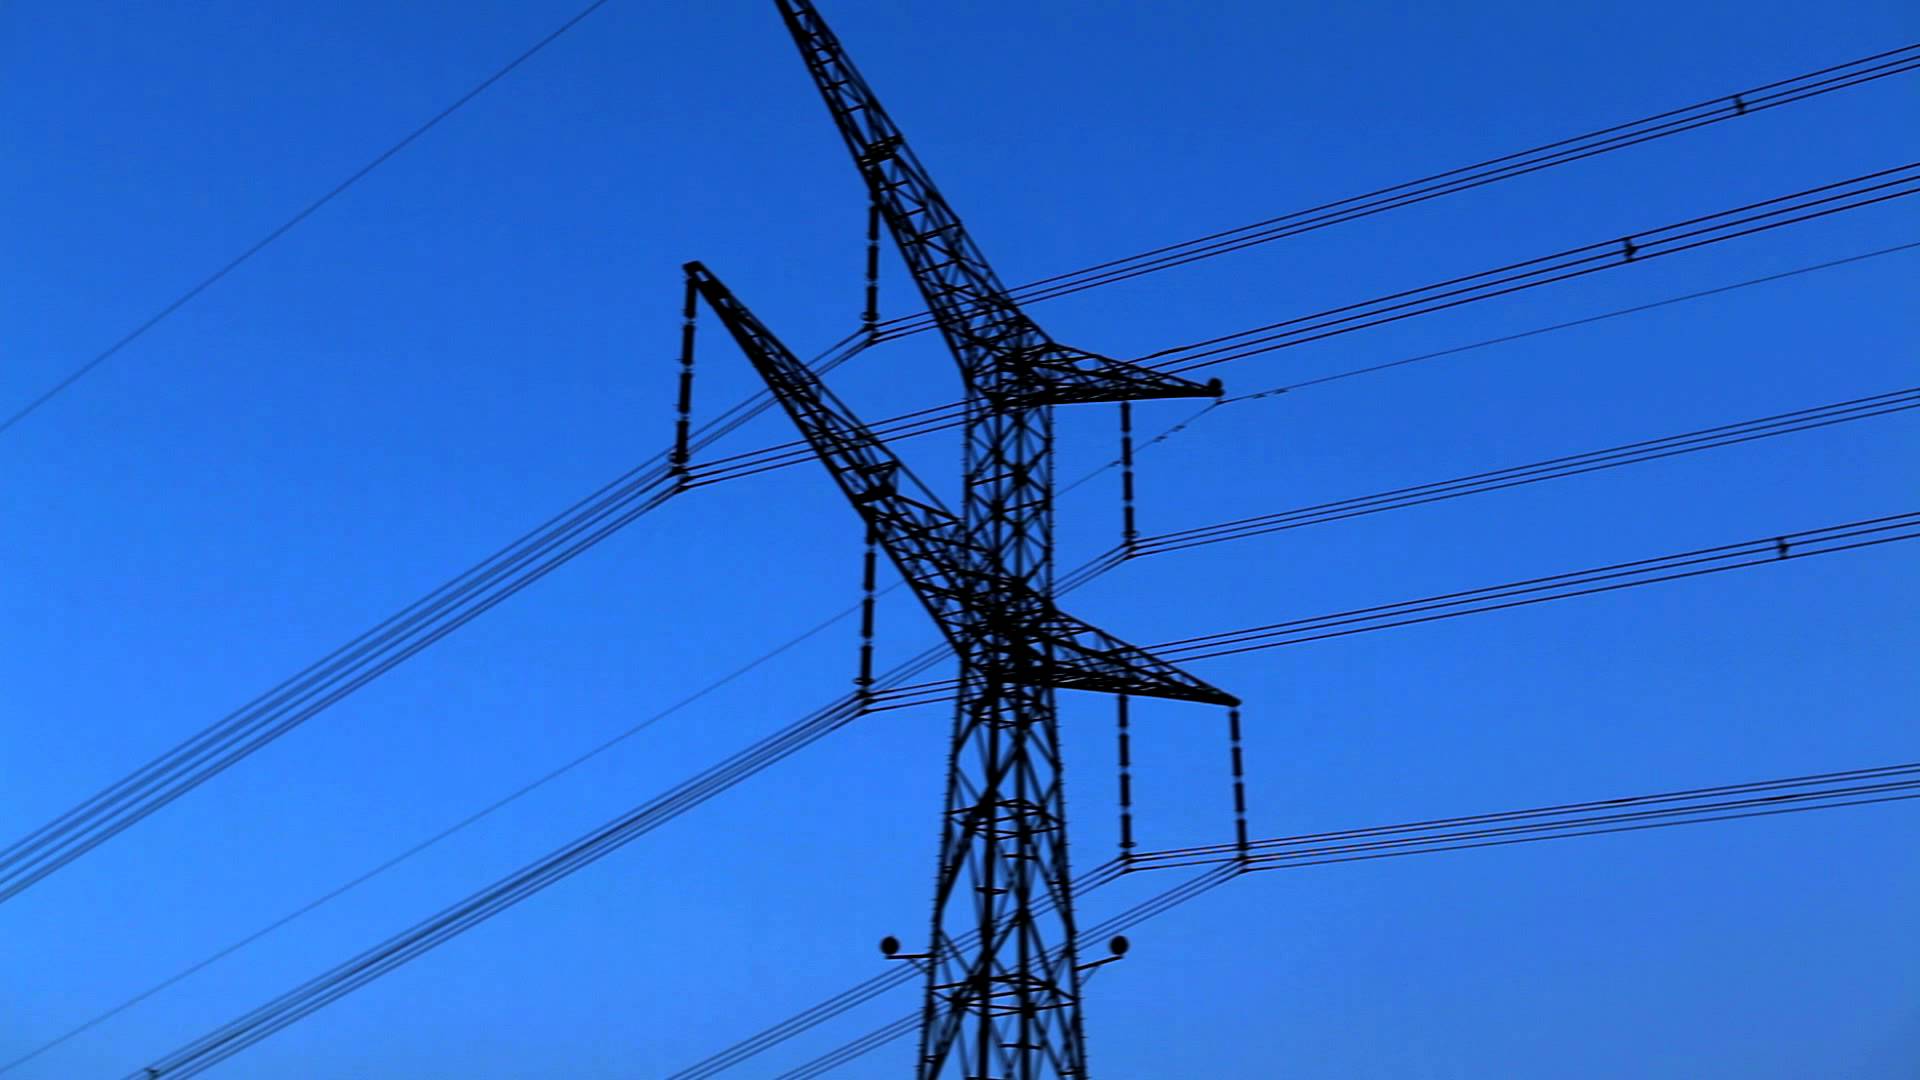 Stock Footage of a tower and power lines against the blue sky in ...